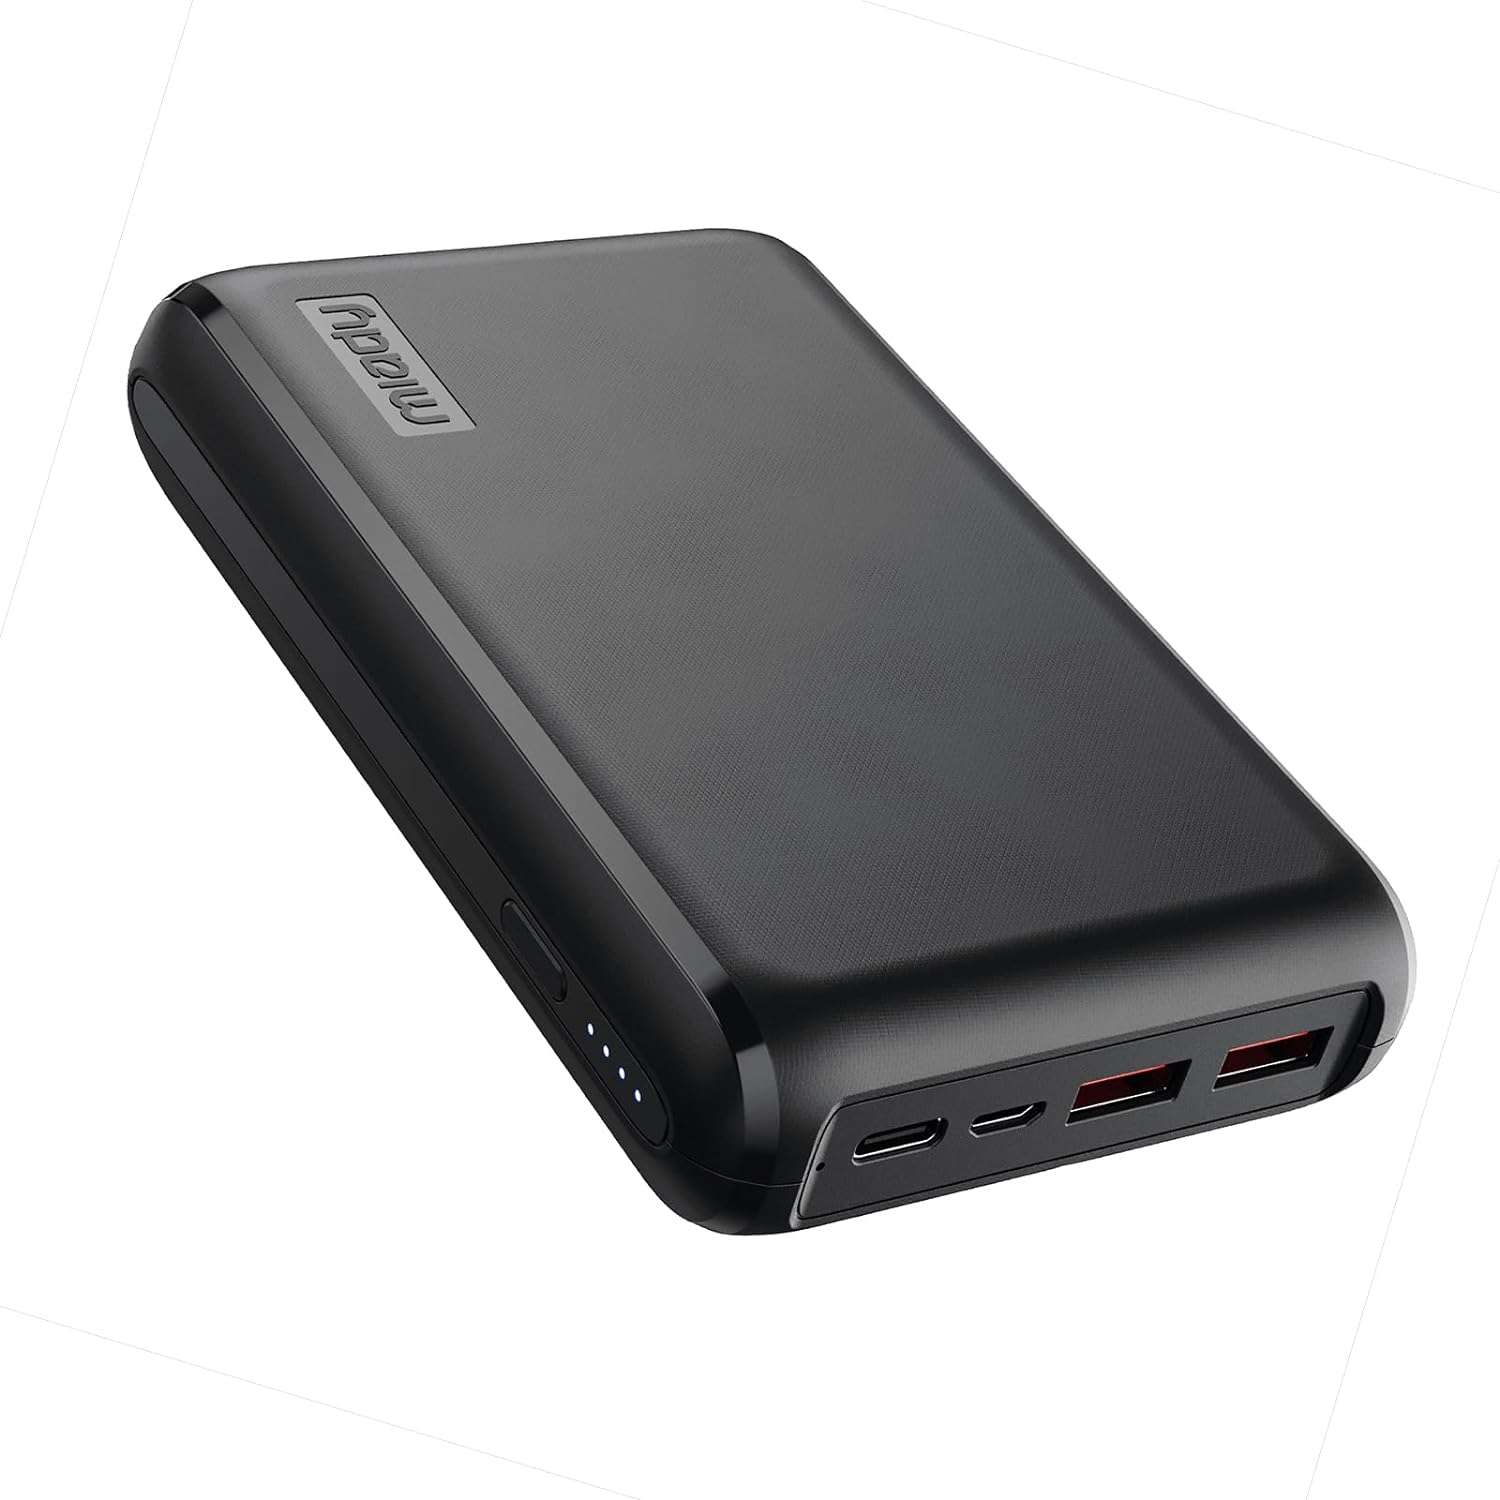 Miady PD Portable Charger 85W Total Output, 20000mAh Power Bank with 65W USB-C Fast Charging, External Battery Pack for iPhones, Android Phones, and etc